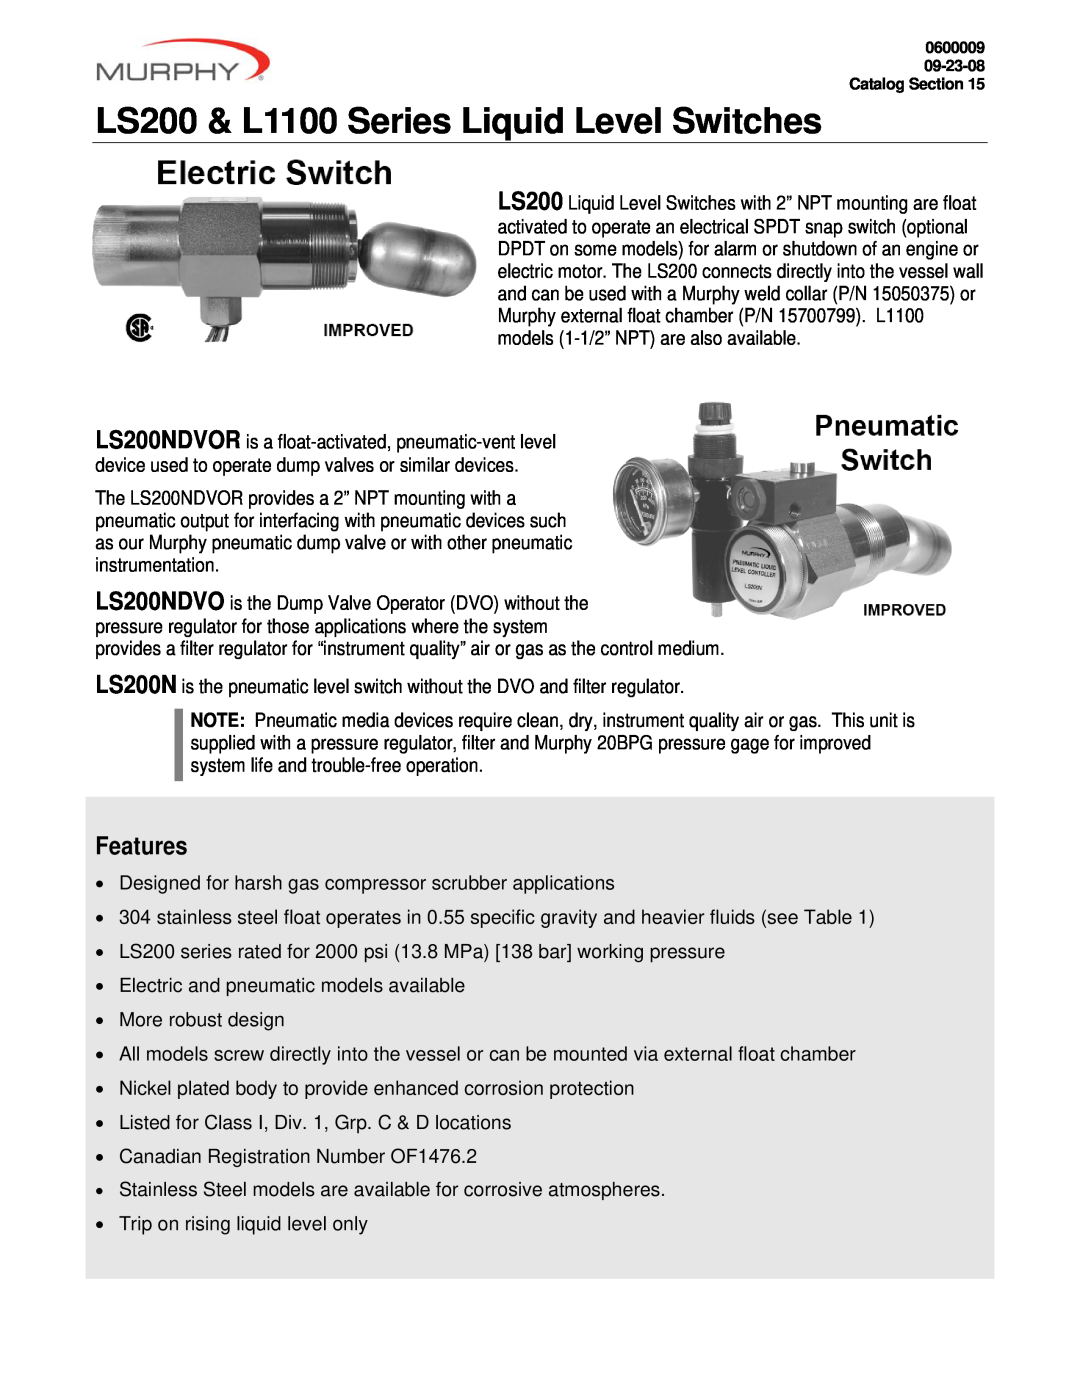 Murphy LS200NDVOR manual LS200 & L1100 Series Liquid Level Switches, Features 